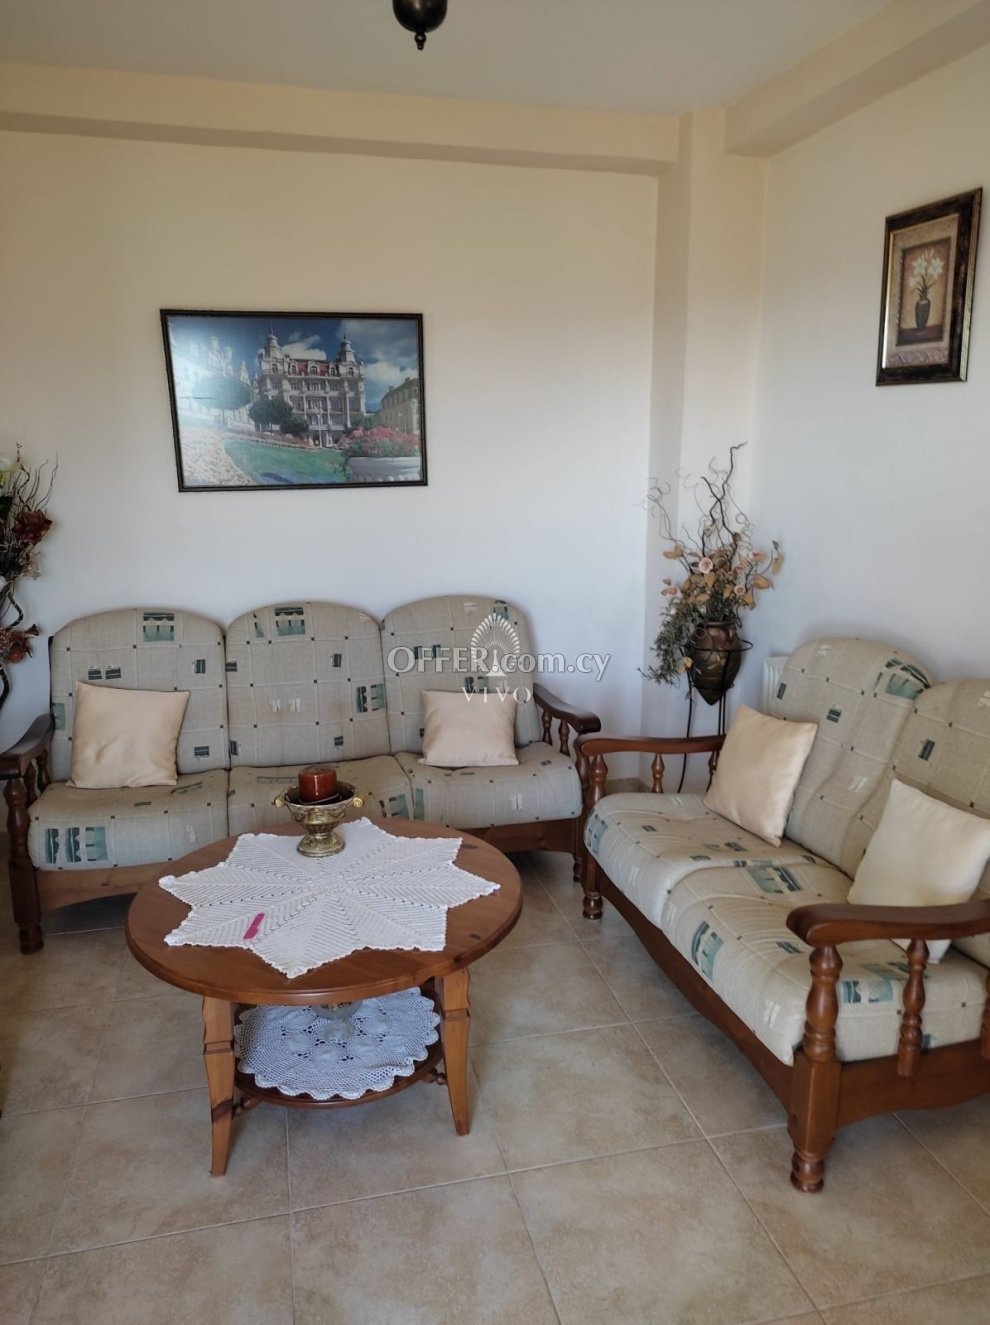 FOUR BEDROOM FULLY FURNISHED HOUSE IN PELENTRI - 5